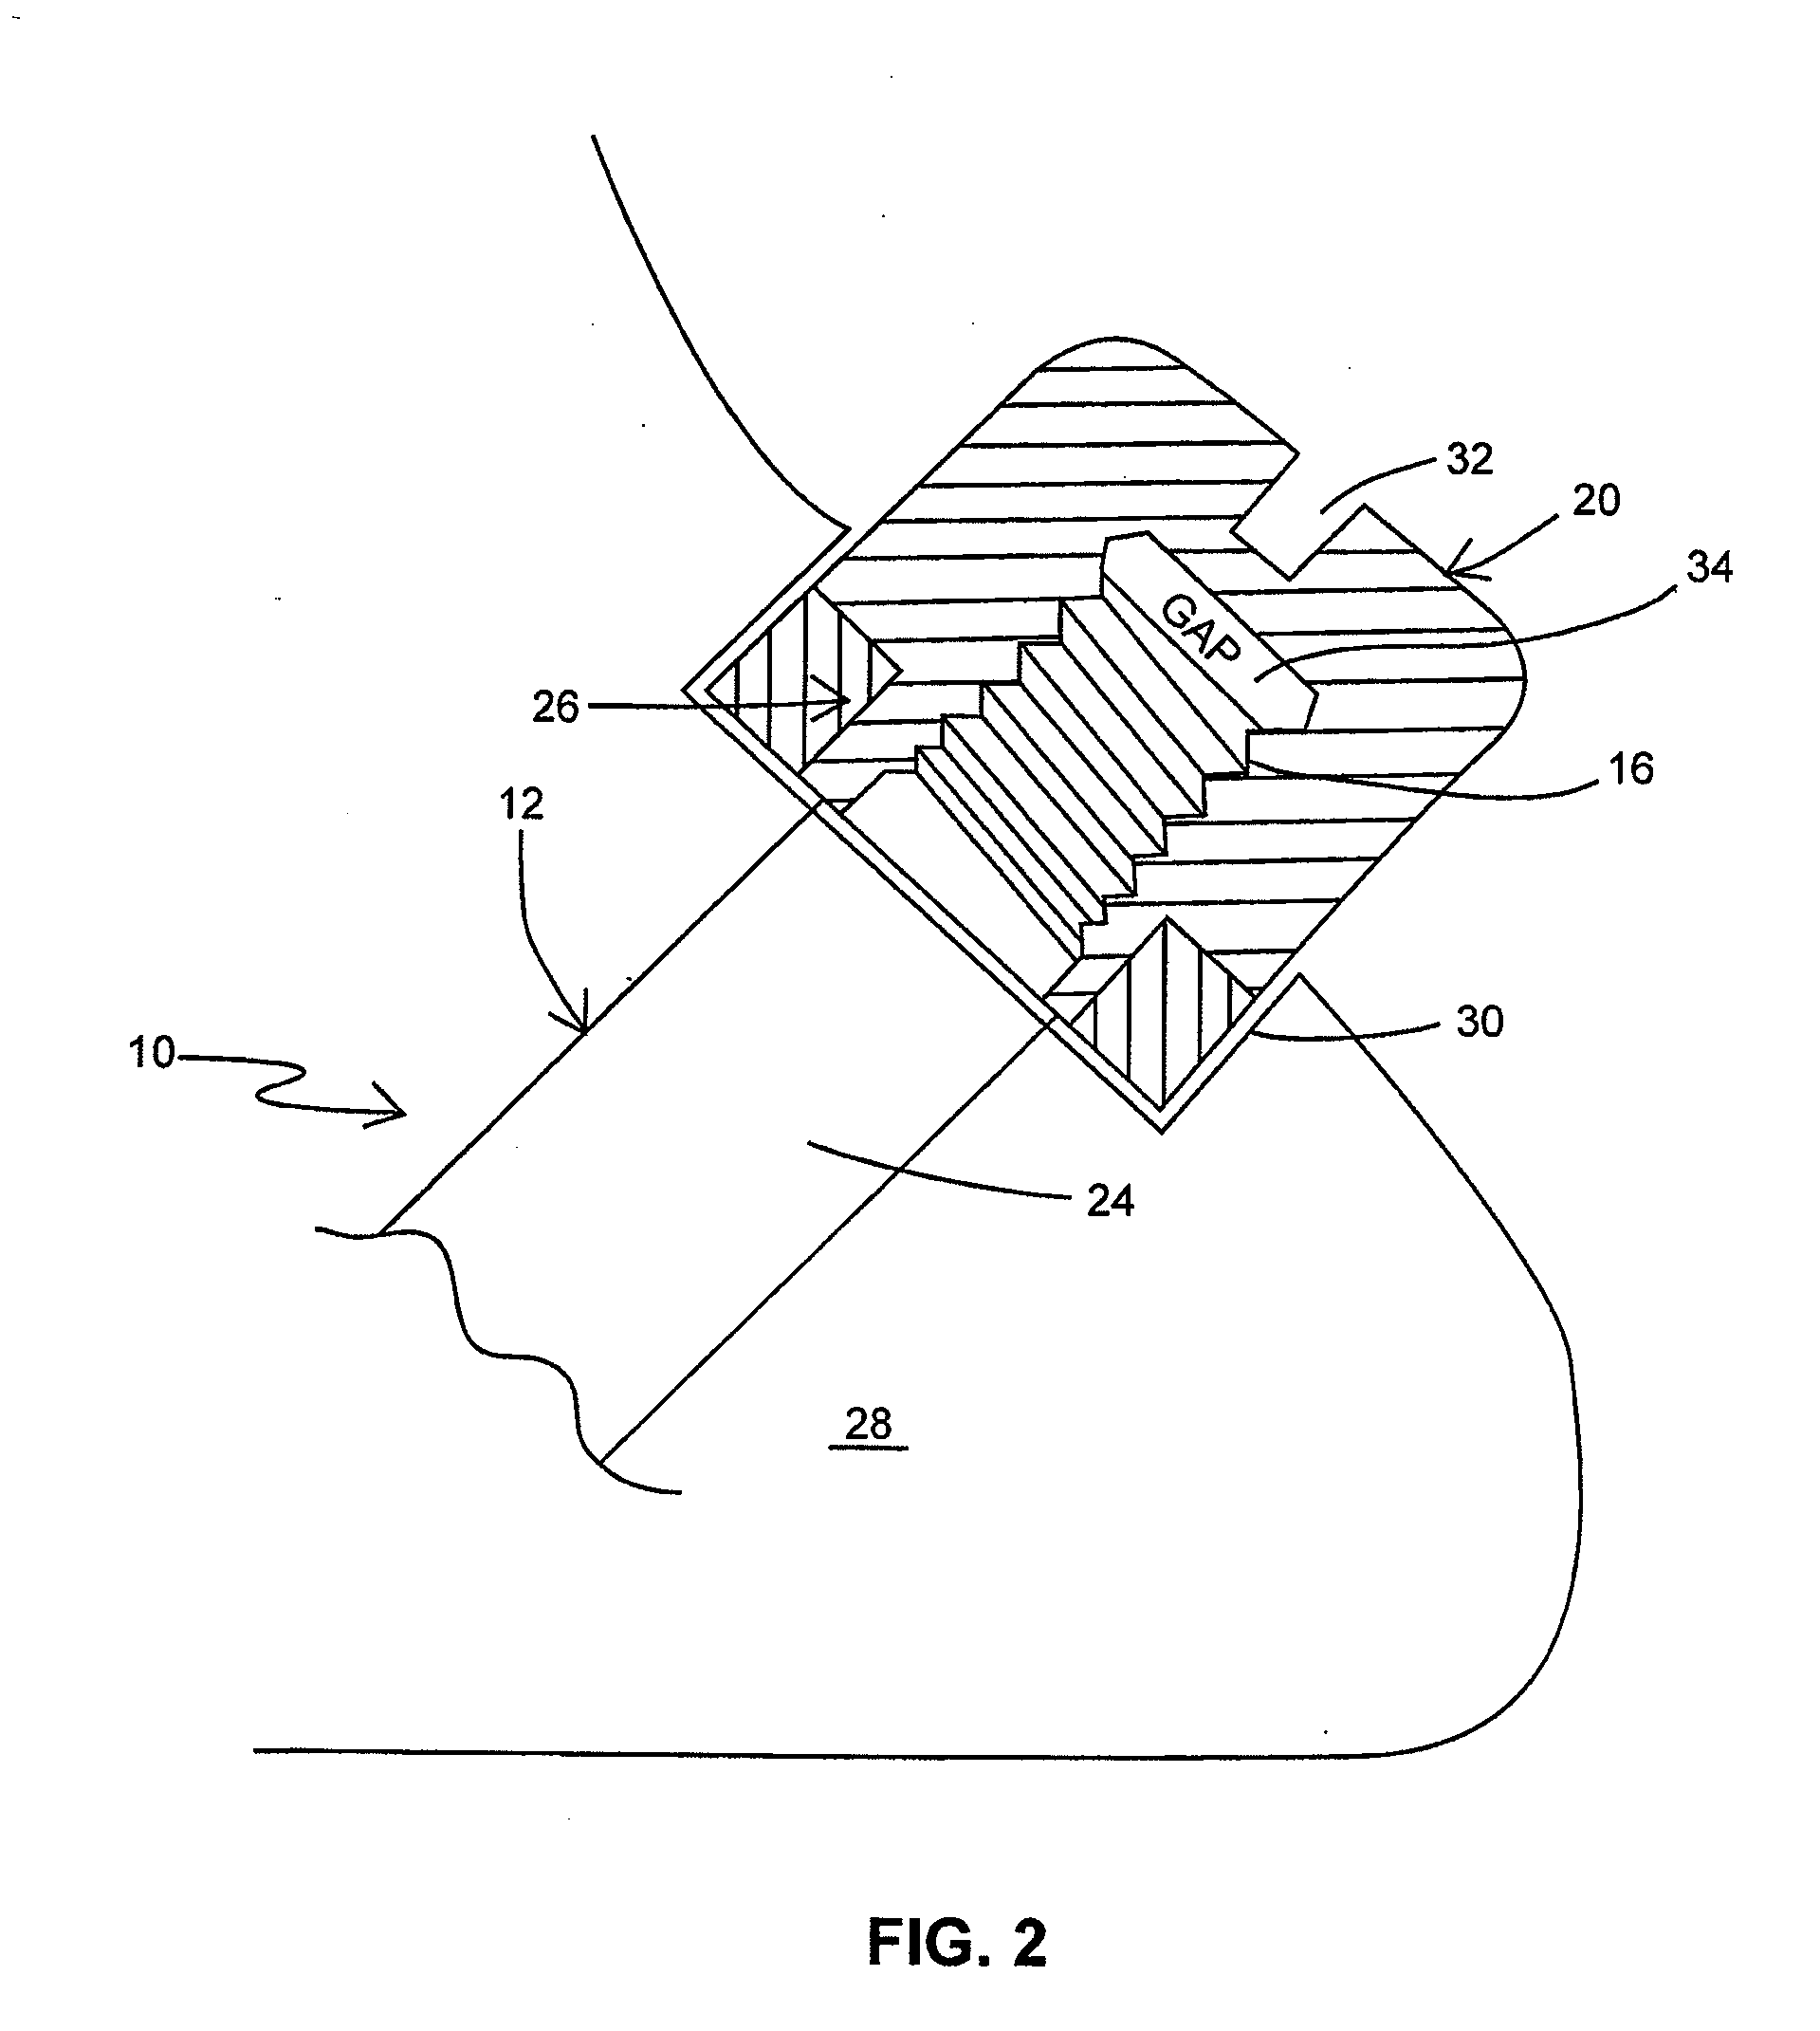 Orthopedic implant having non-circular cross section and method of use thereof